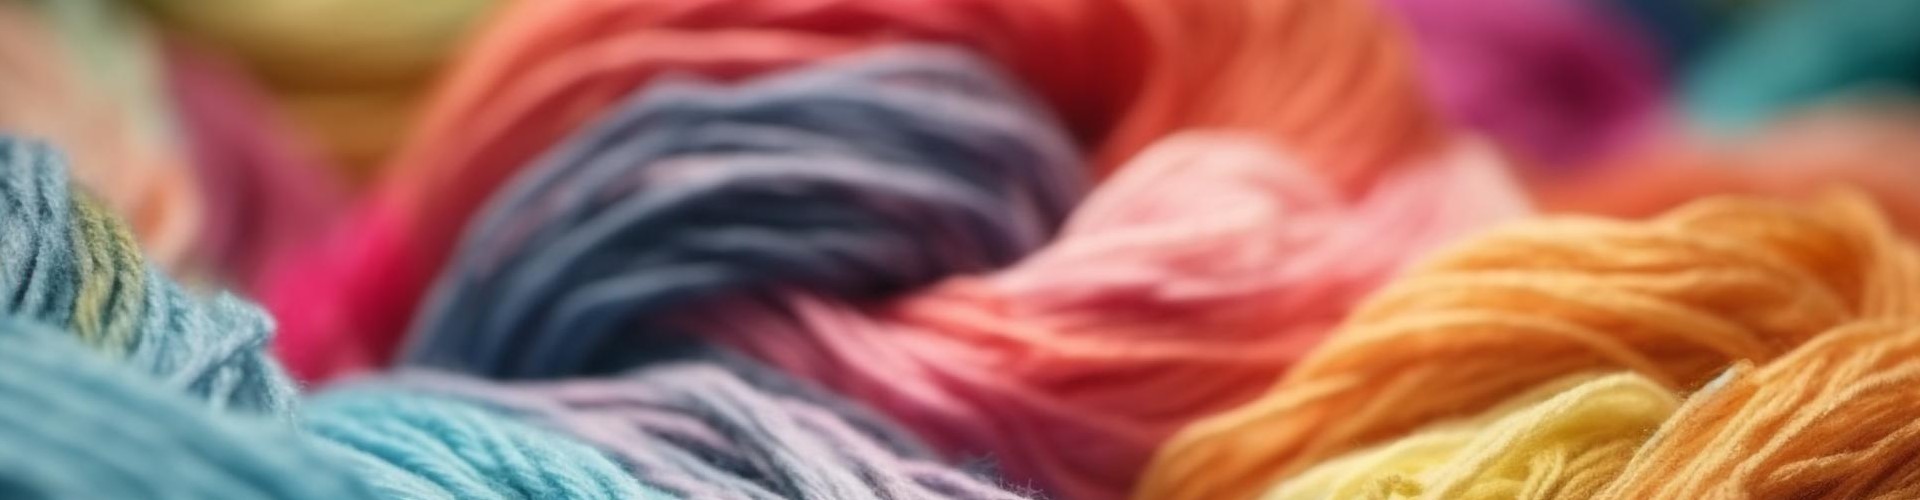 Digital transformation solution for Textile Industry